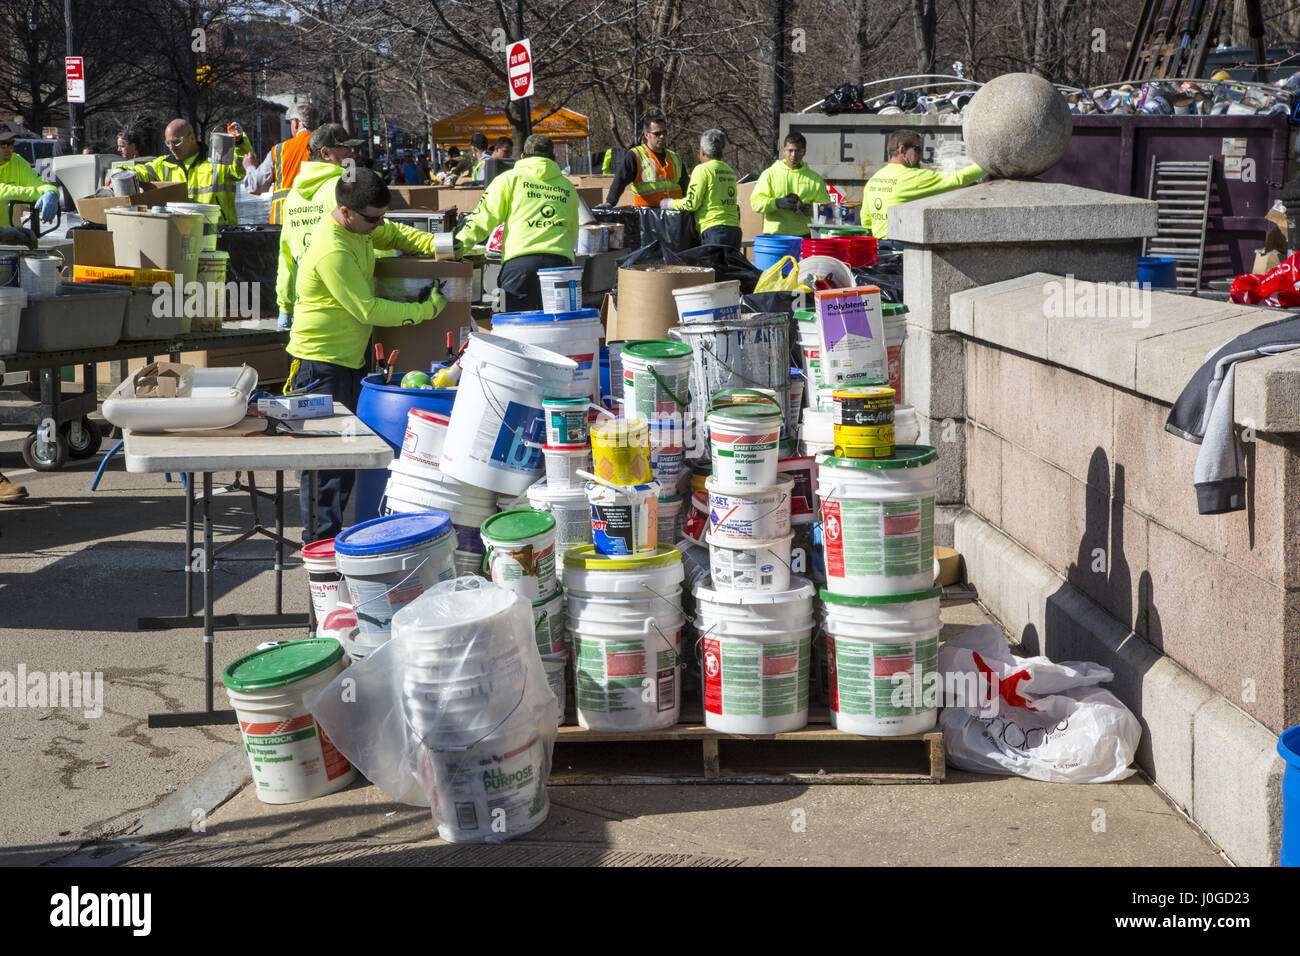 New York City hosts a Safe Disposal Event in Prospect Park where people